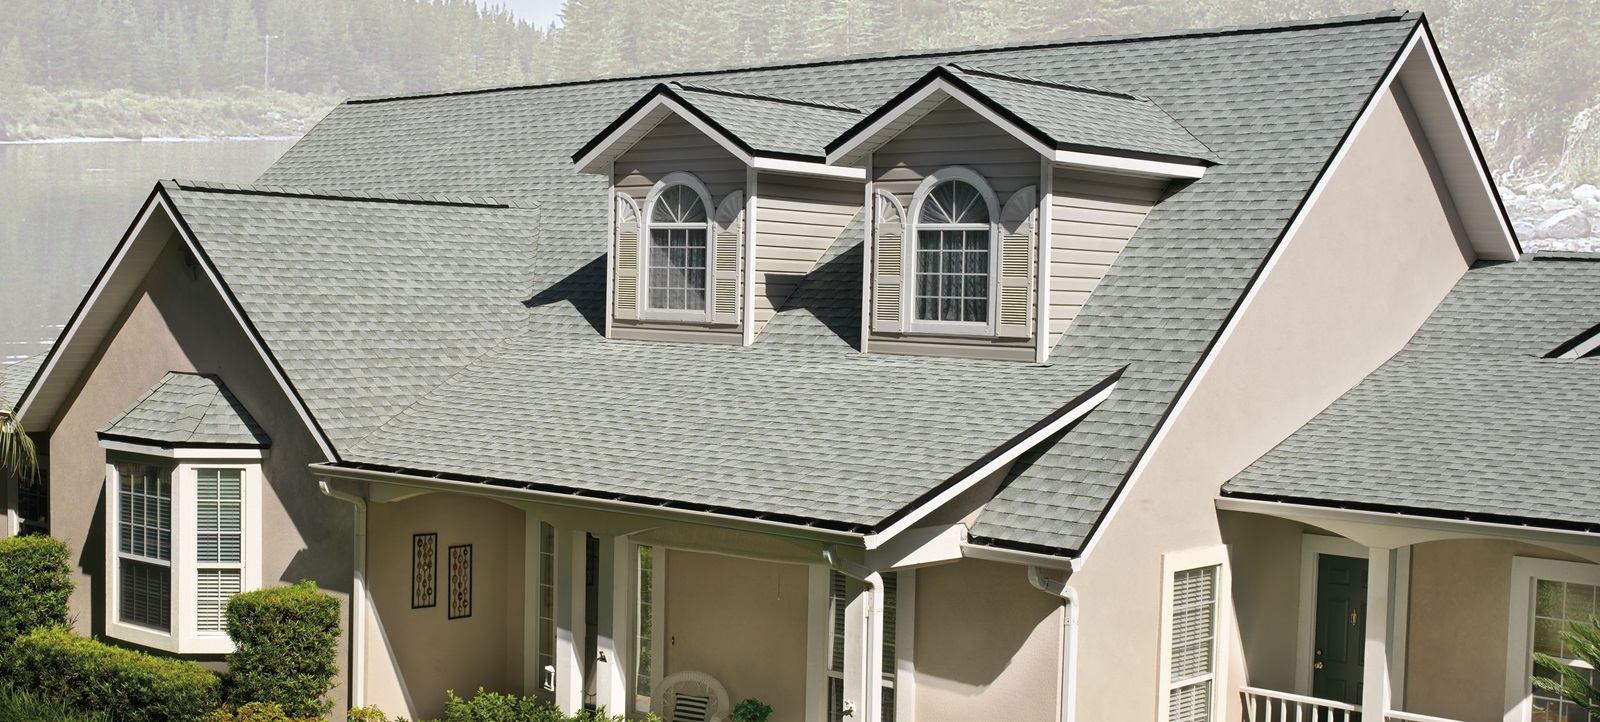 5 advantages of the roofing shingles